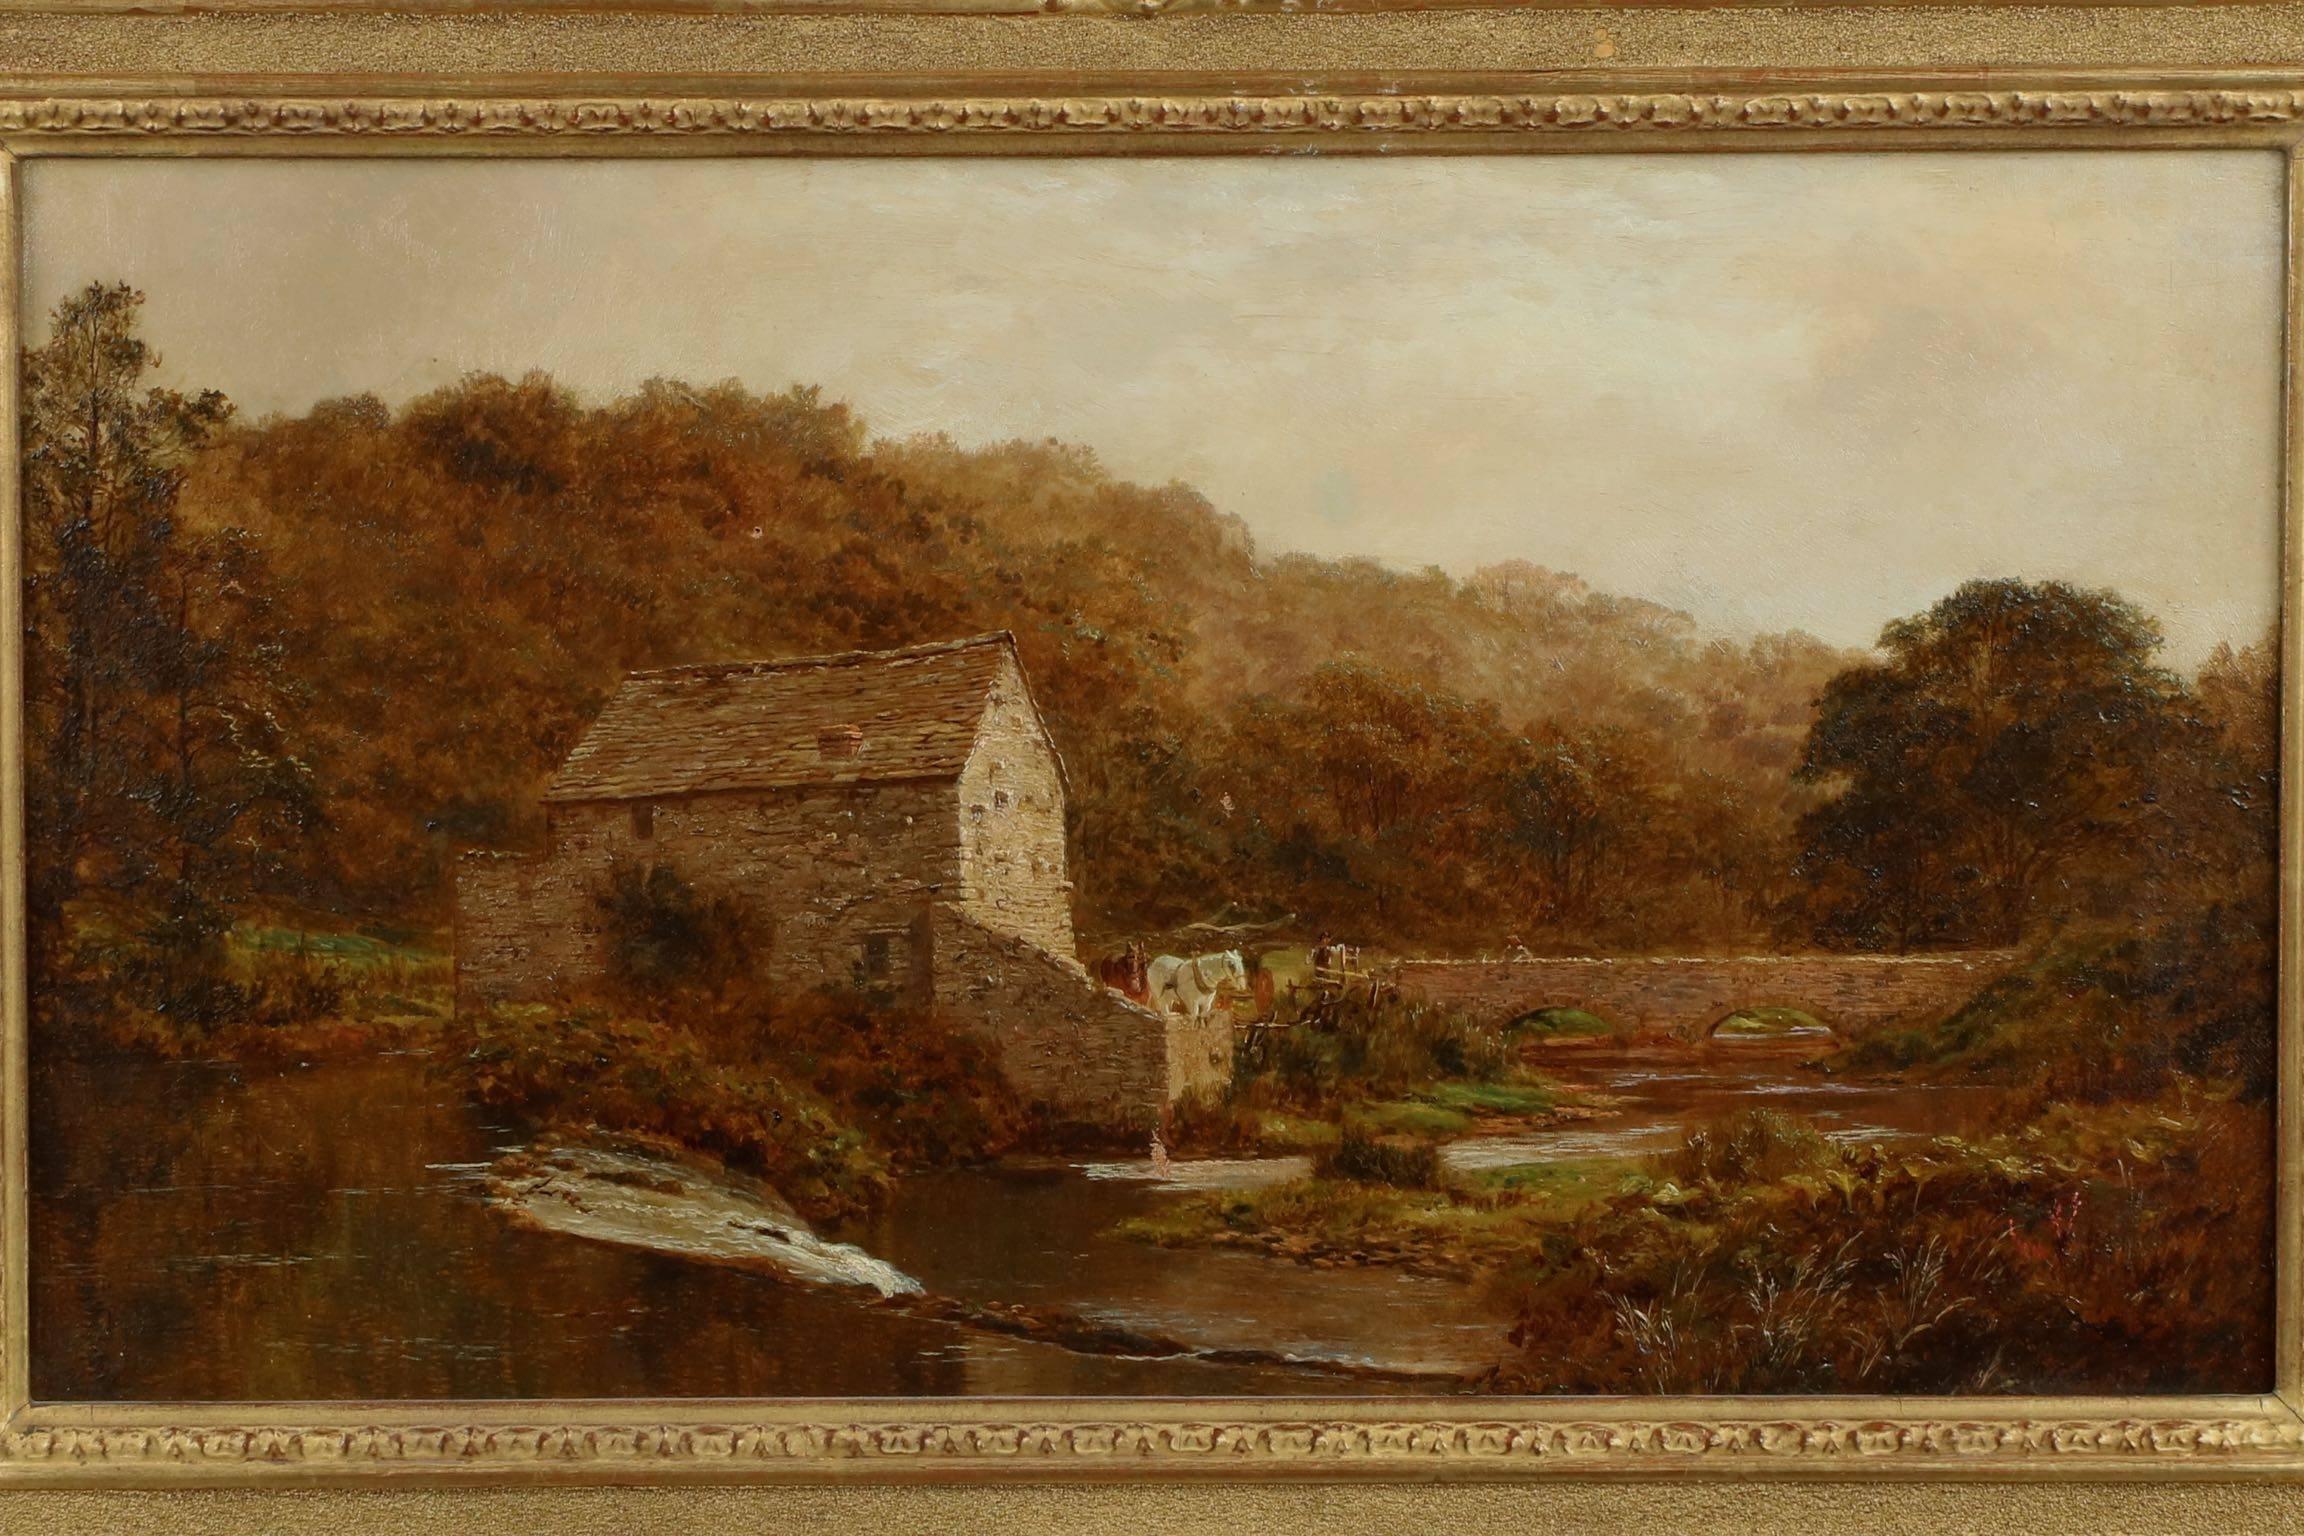 The opposite view of this exceptional painting by Robert Gallon is held in the Lancaster Maritime Museum in Lancaster, United Kingdom; this work is painted from the opposite side, looking down the river at the mill and bridge from above the dip in